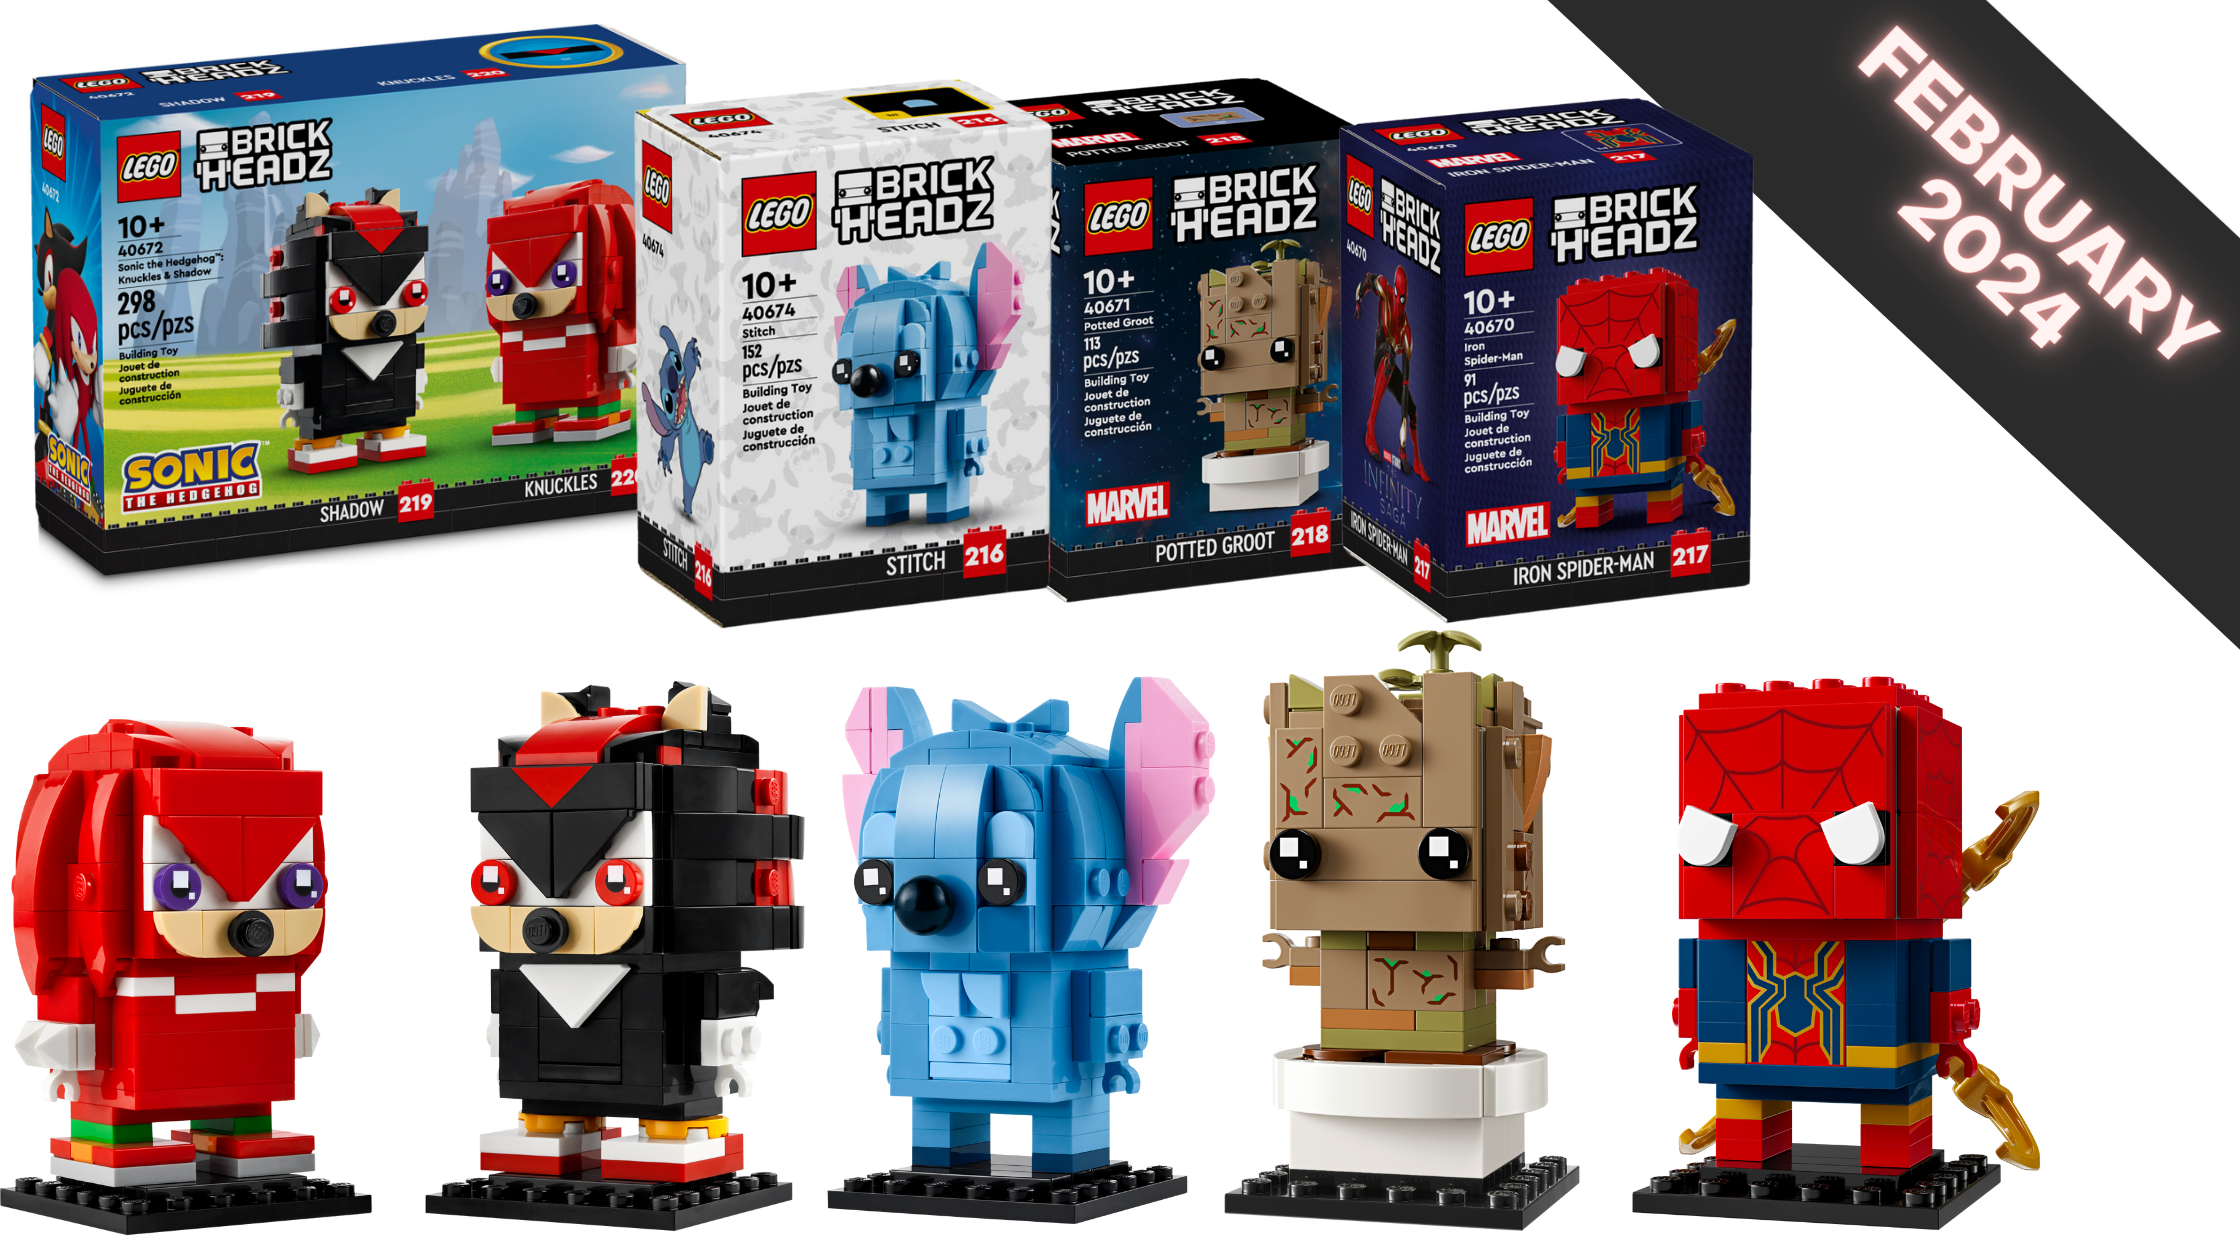 Affordable stitch lego For Sale, Toys & Games